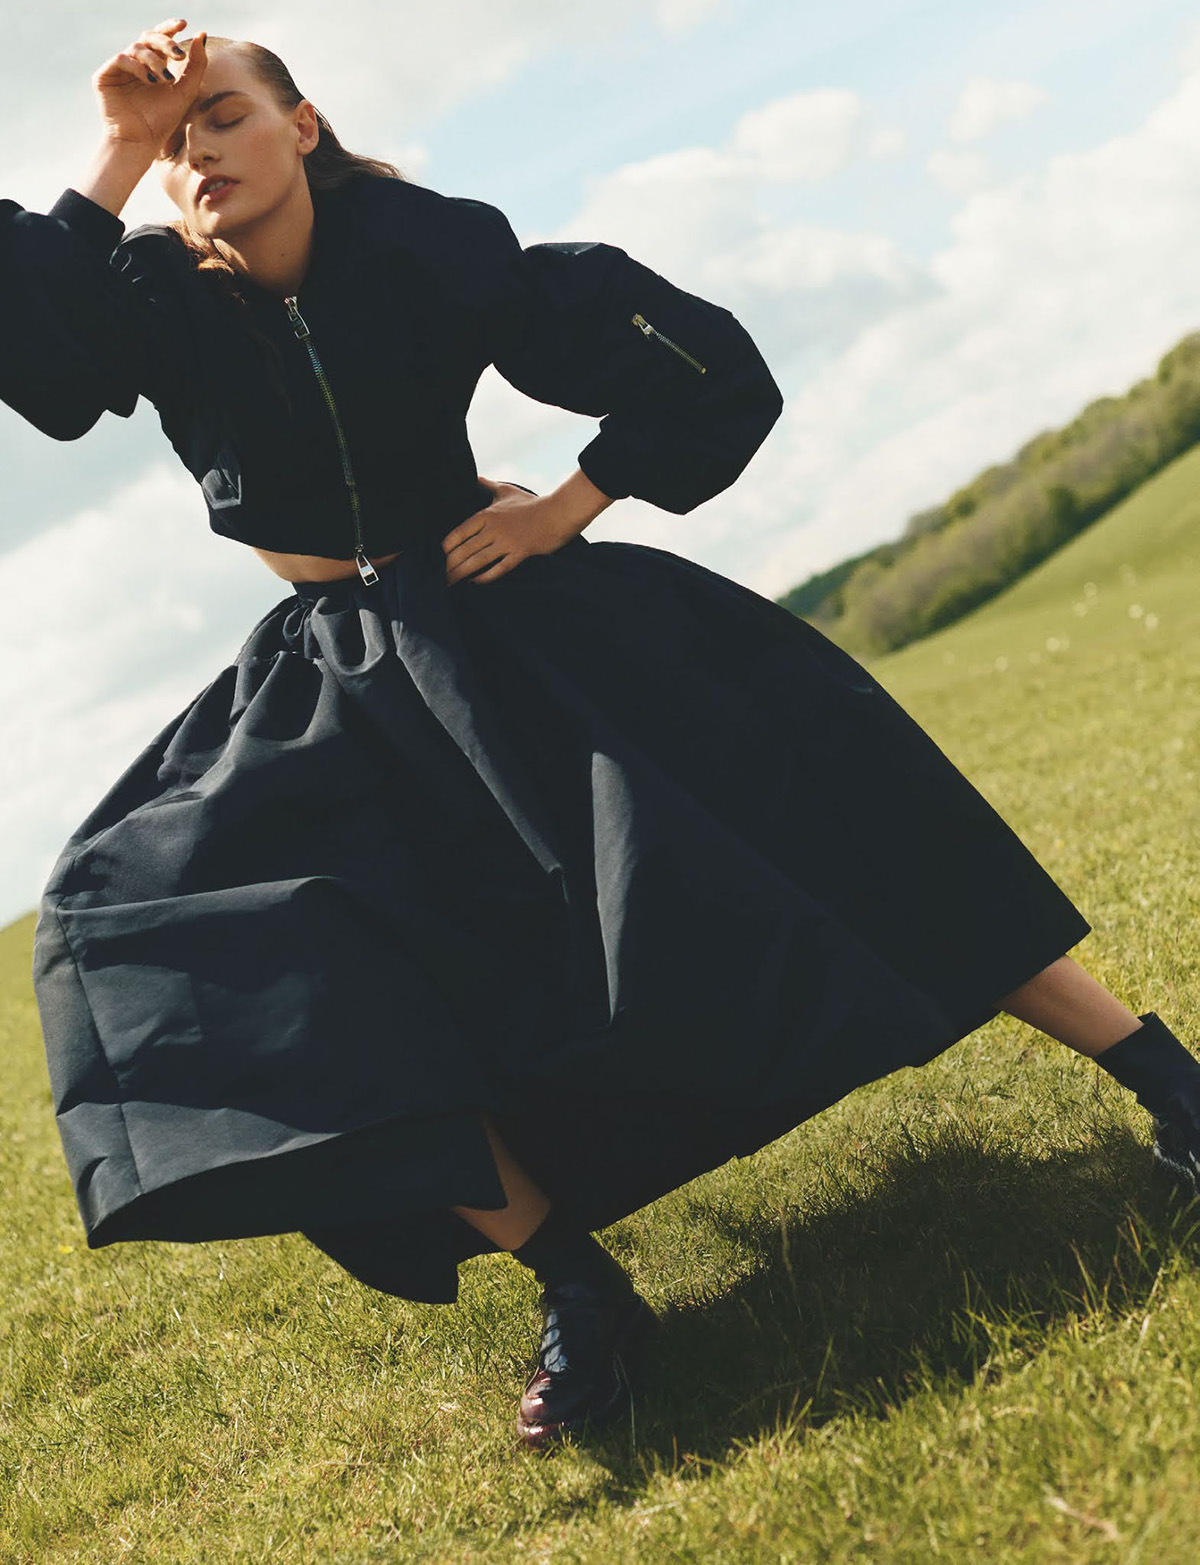 Fran Summers by Scott Trindle for British Vogue August 2021